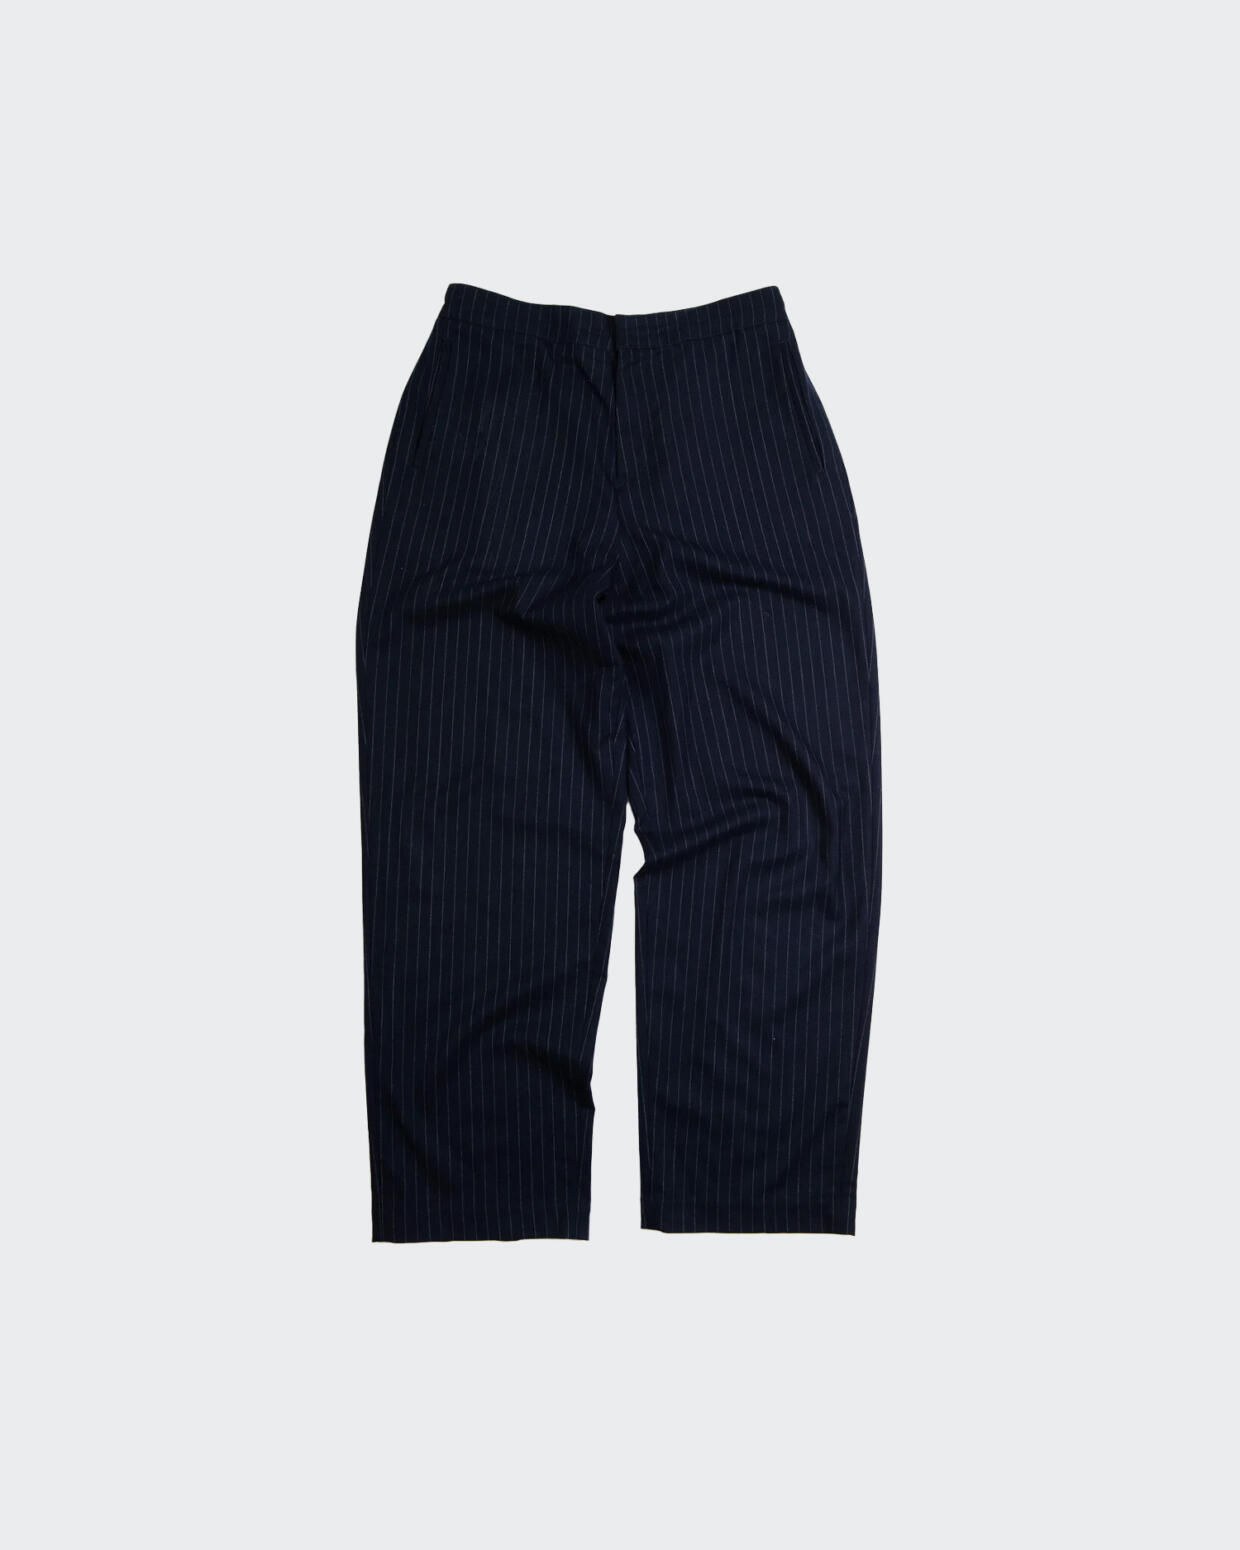 New Amsterdam Surf Association After Trousers Pinstripe